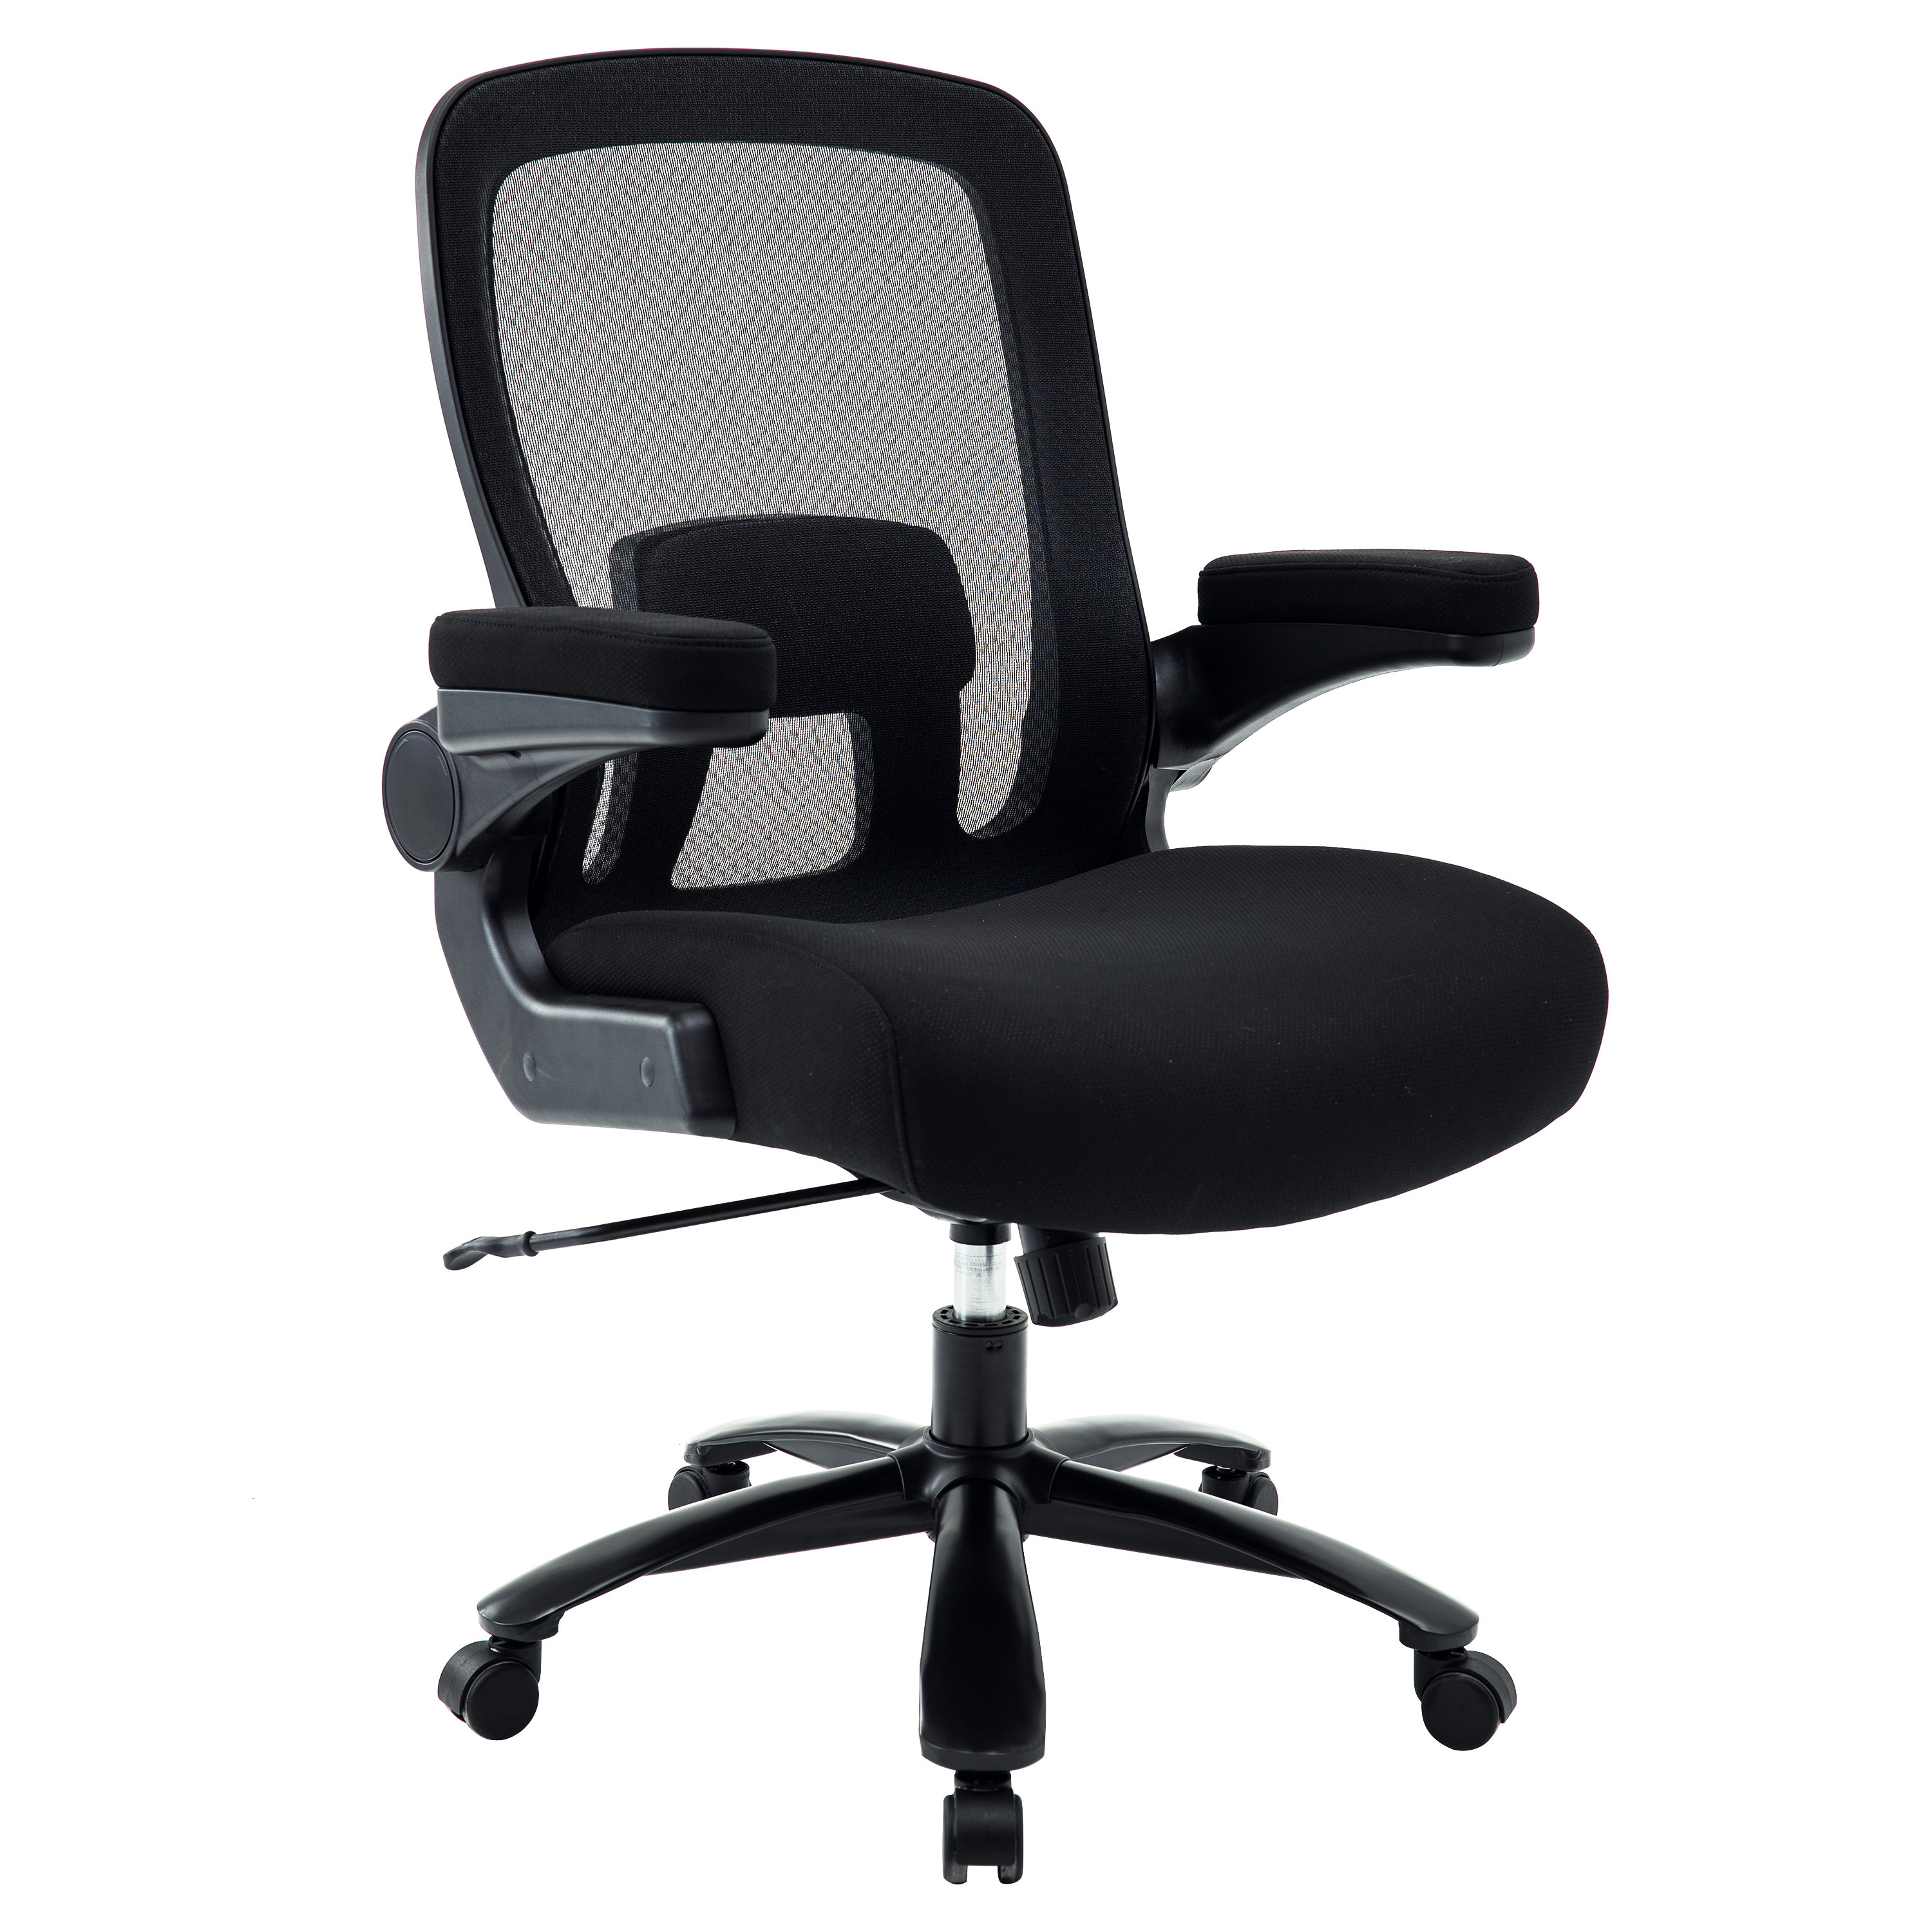 Snugway Ergonomic High Back Mesh Home Office Chair with Footrest